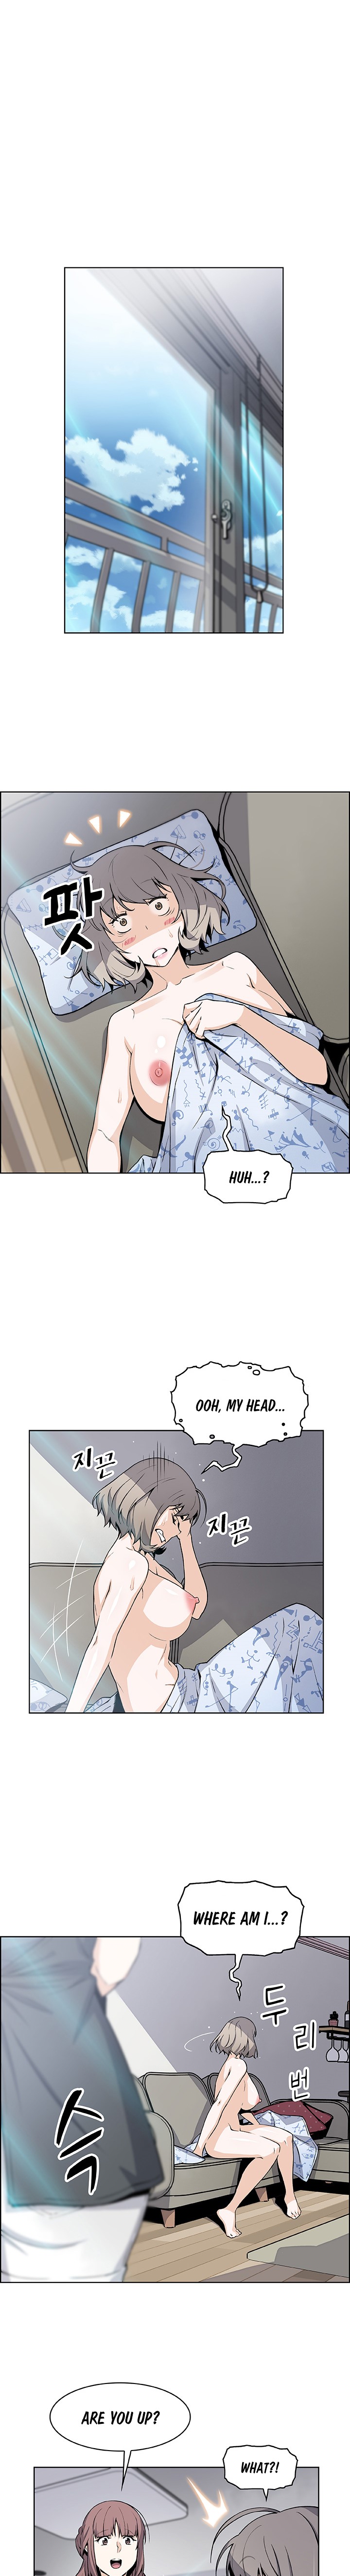 Housekeeper Manhwa - Chapter 35 Page 7